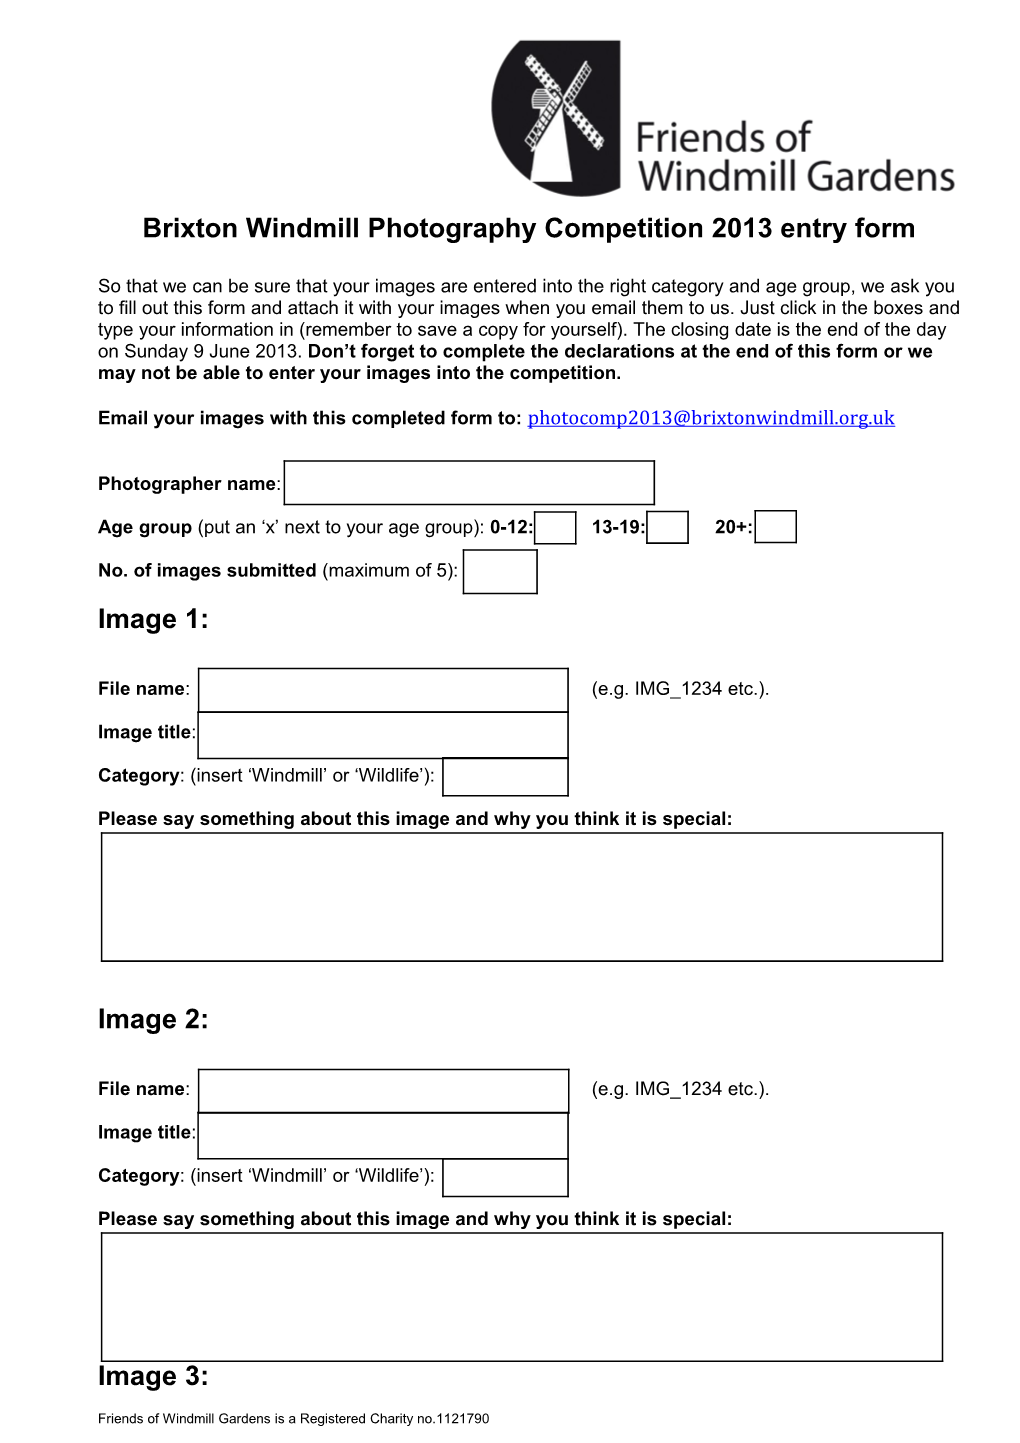 Photography Consent Form